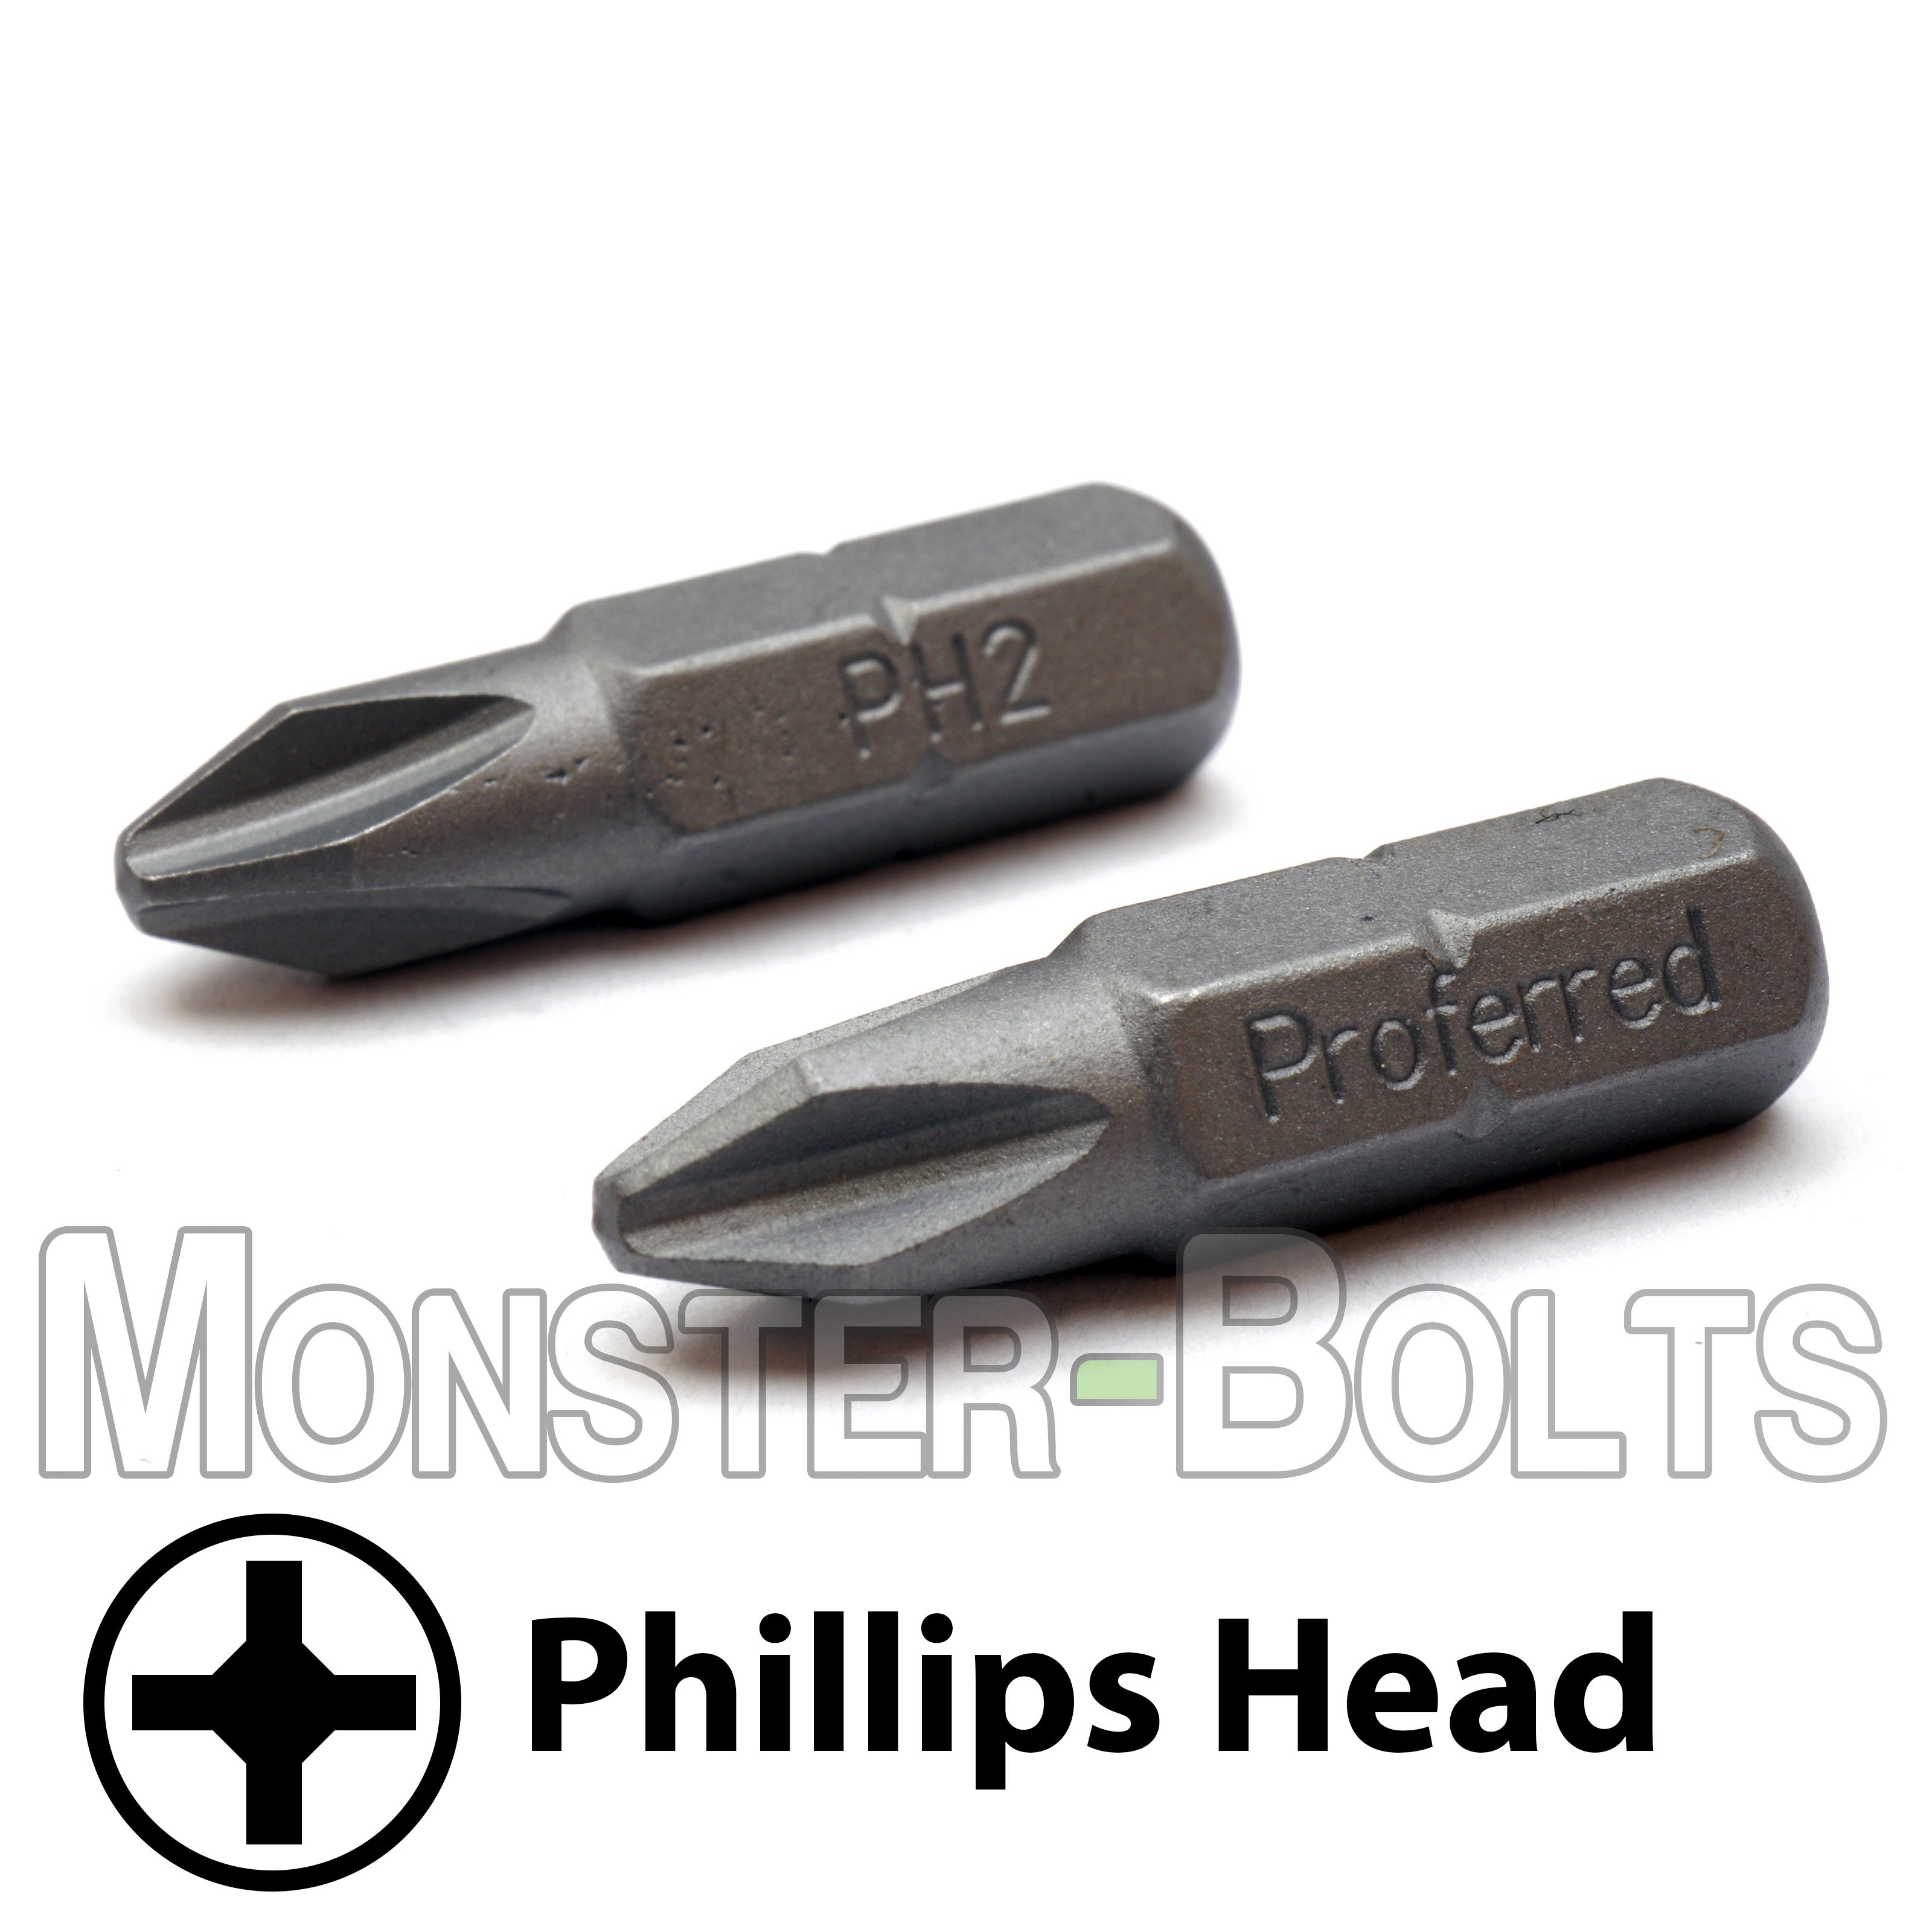 Phillips Double Head Bit PH2 S2 PH2 1/4 Inch x 2 Inch Lot of 5 Free Shipping